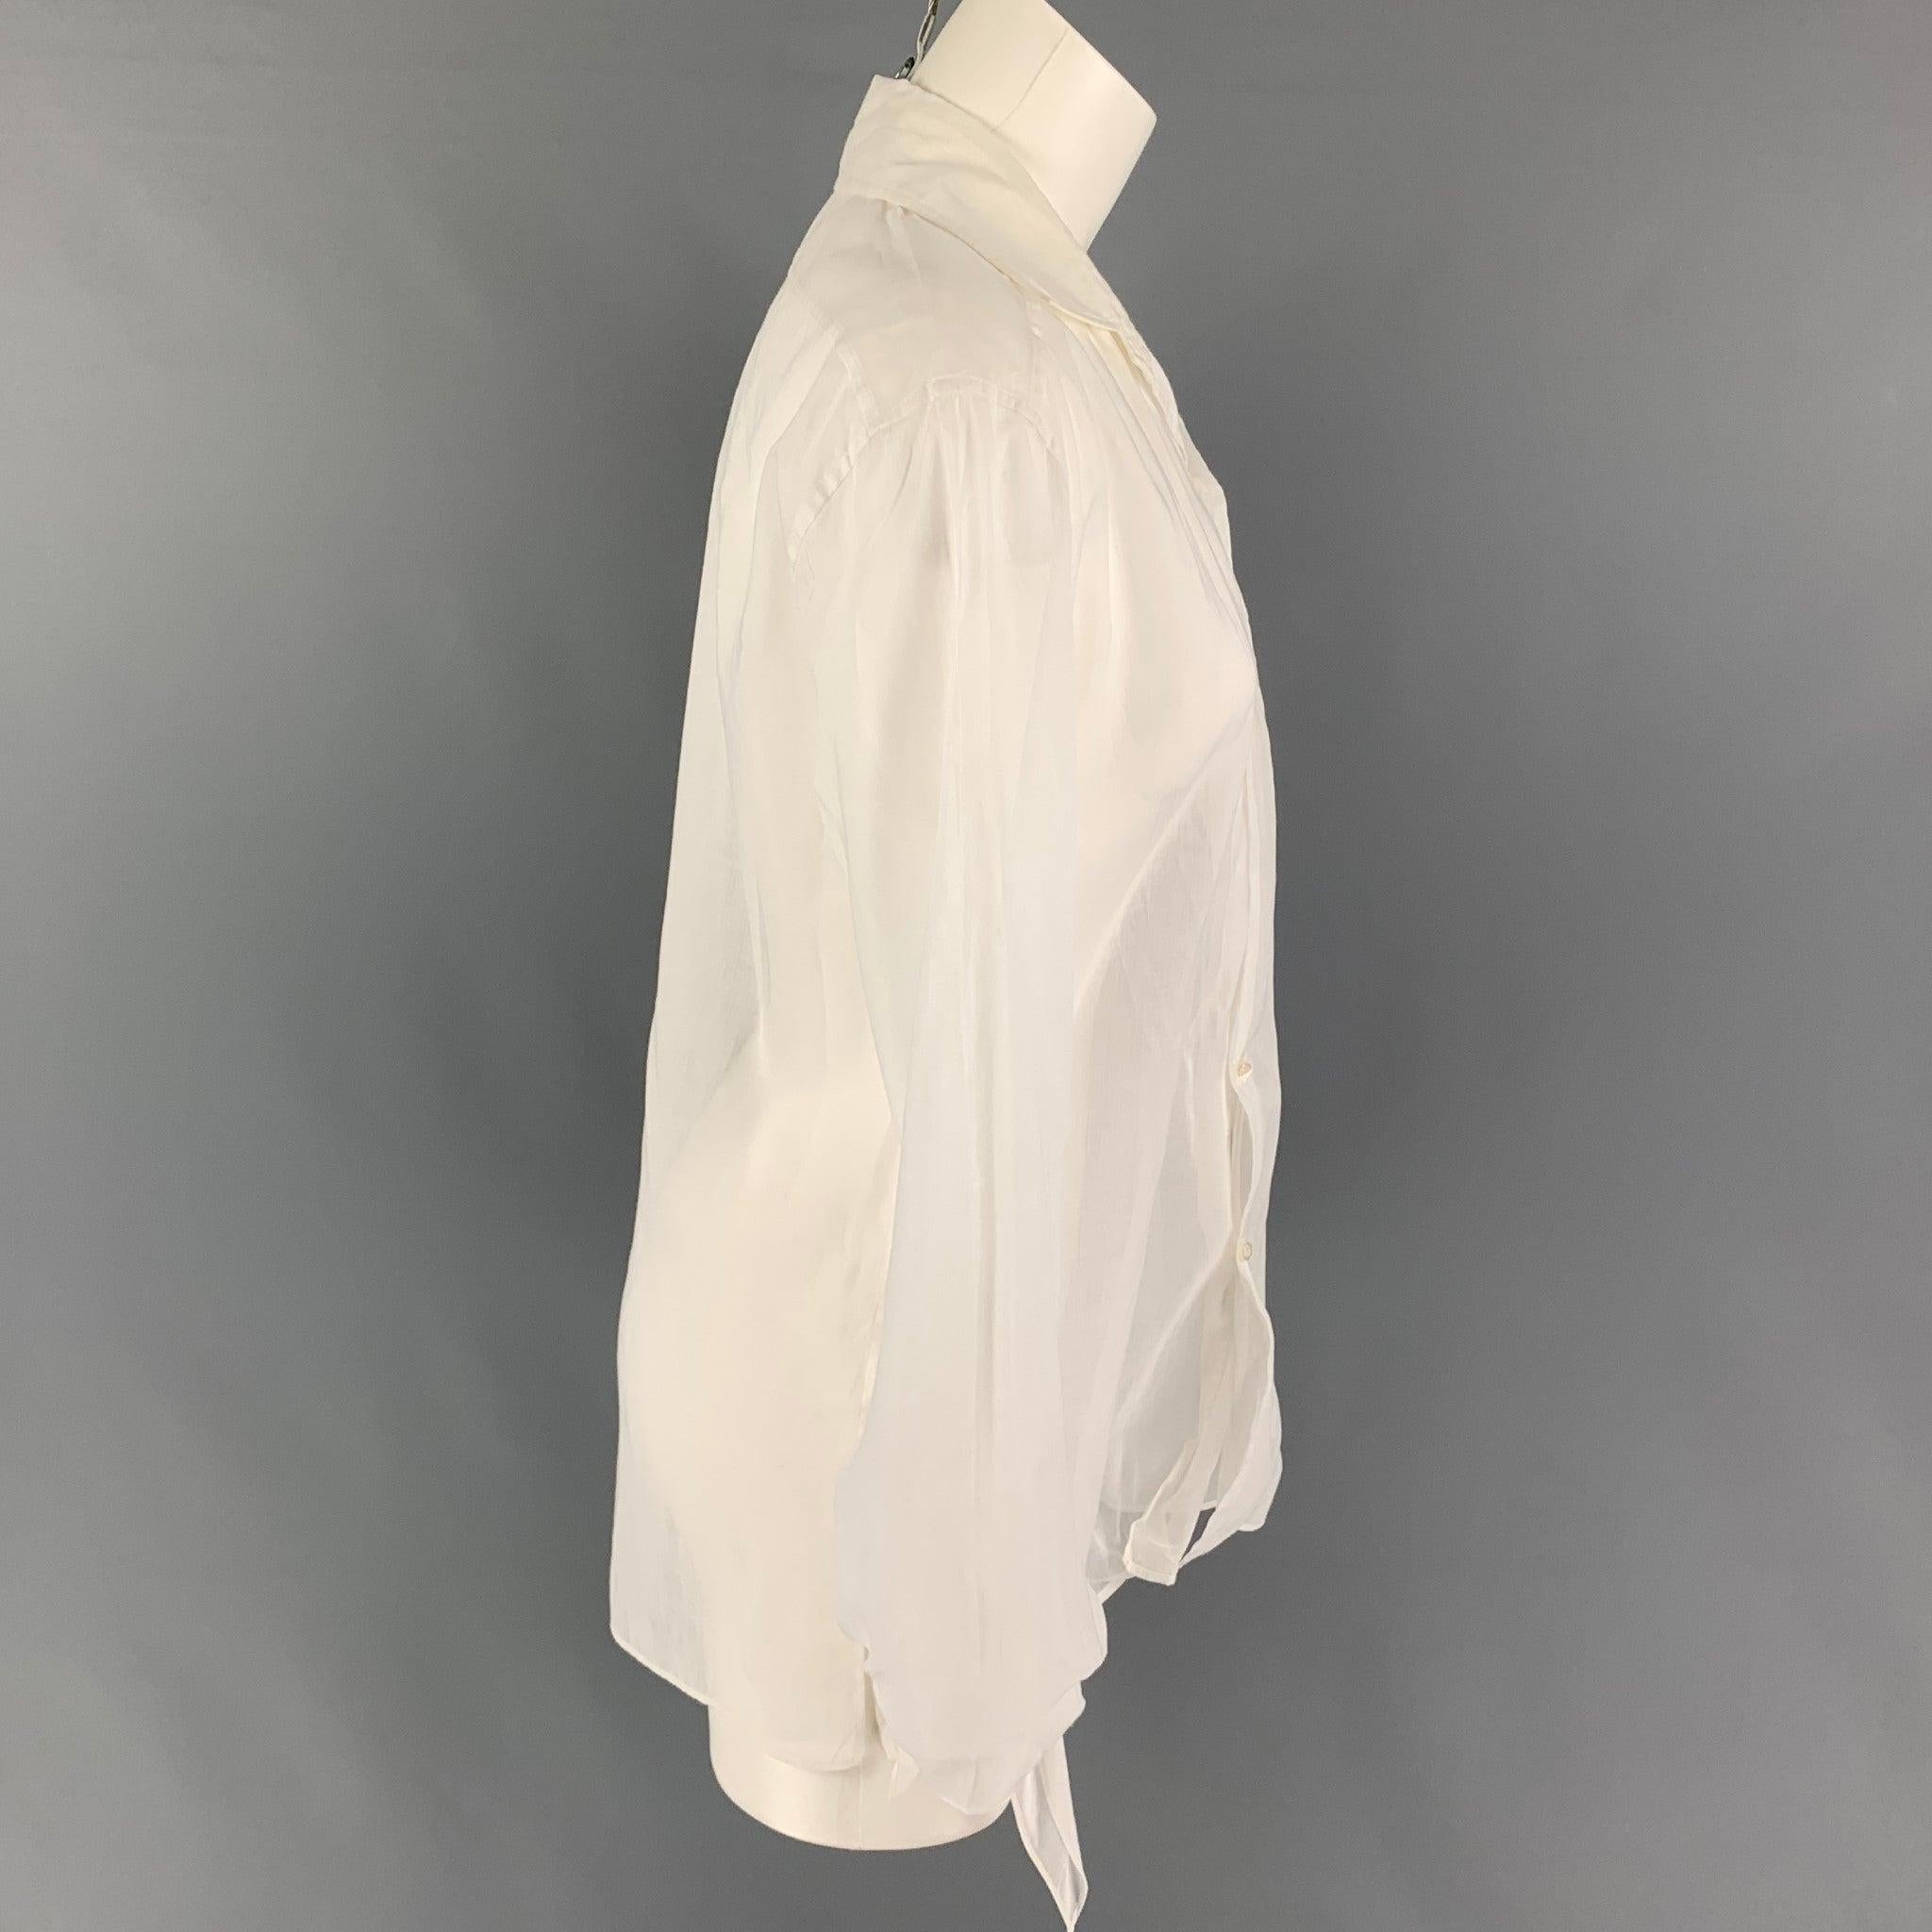 RALPH LAUREN 'Collection' blouse comes in a white see though cotton featuring self-tie cuff details, embroidered logo, patch pocket, and a button up closure. Made in Italy. Very Good
Pre-Owned Condition. 

Marked:   6 

Measurements: 
 
Shoulder: 18